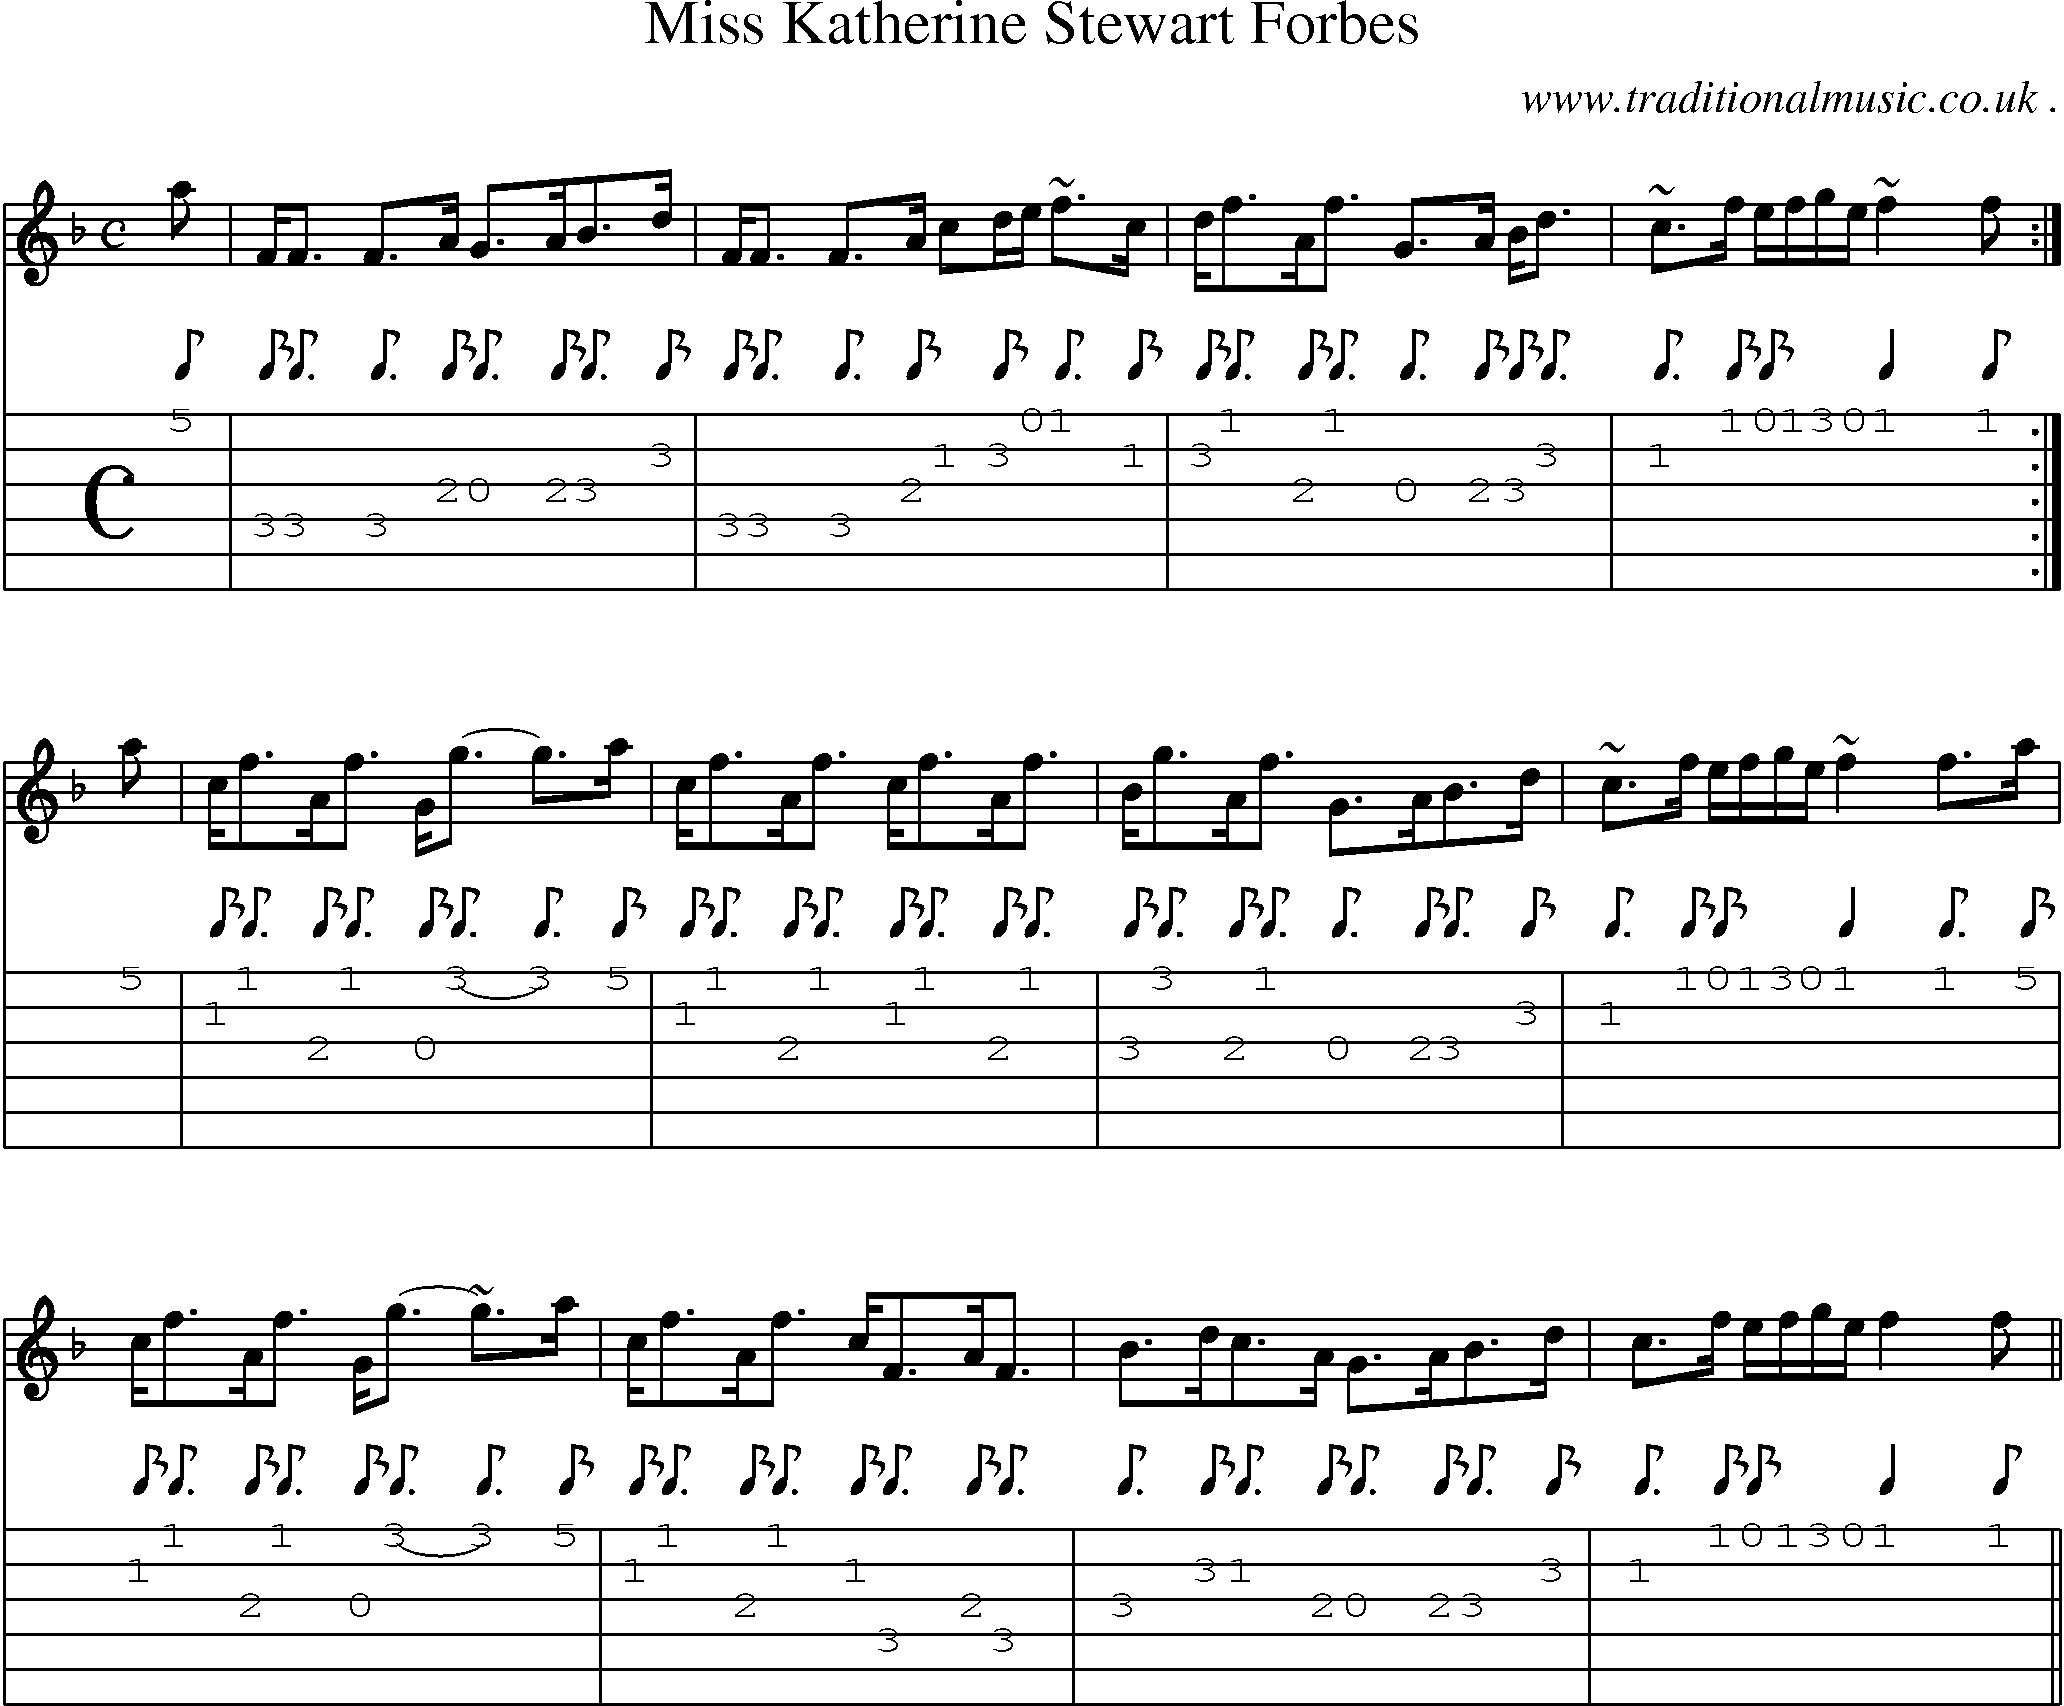 Sheet-music  score, Chords and Guitar Tabs for Miss Katherine Stewart Forbes